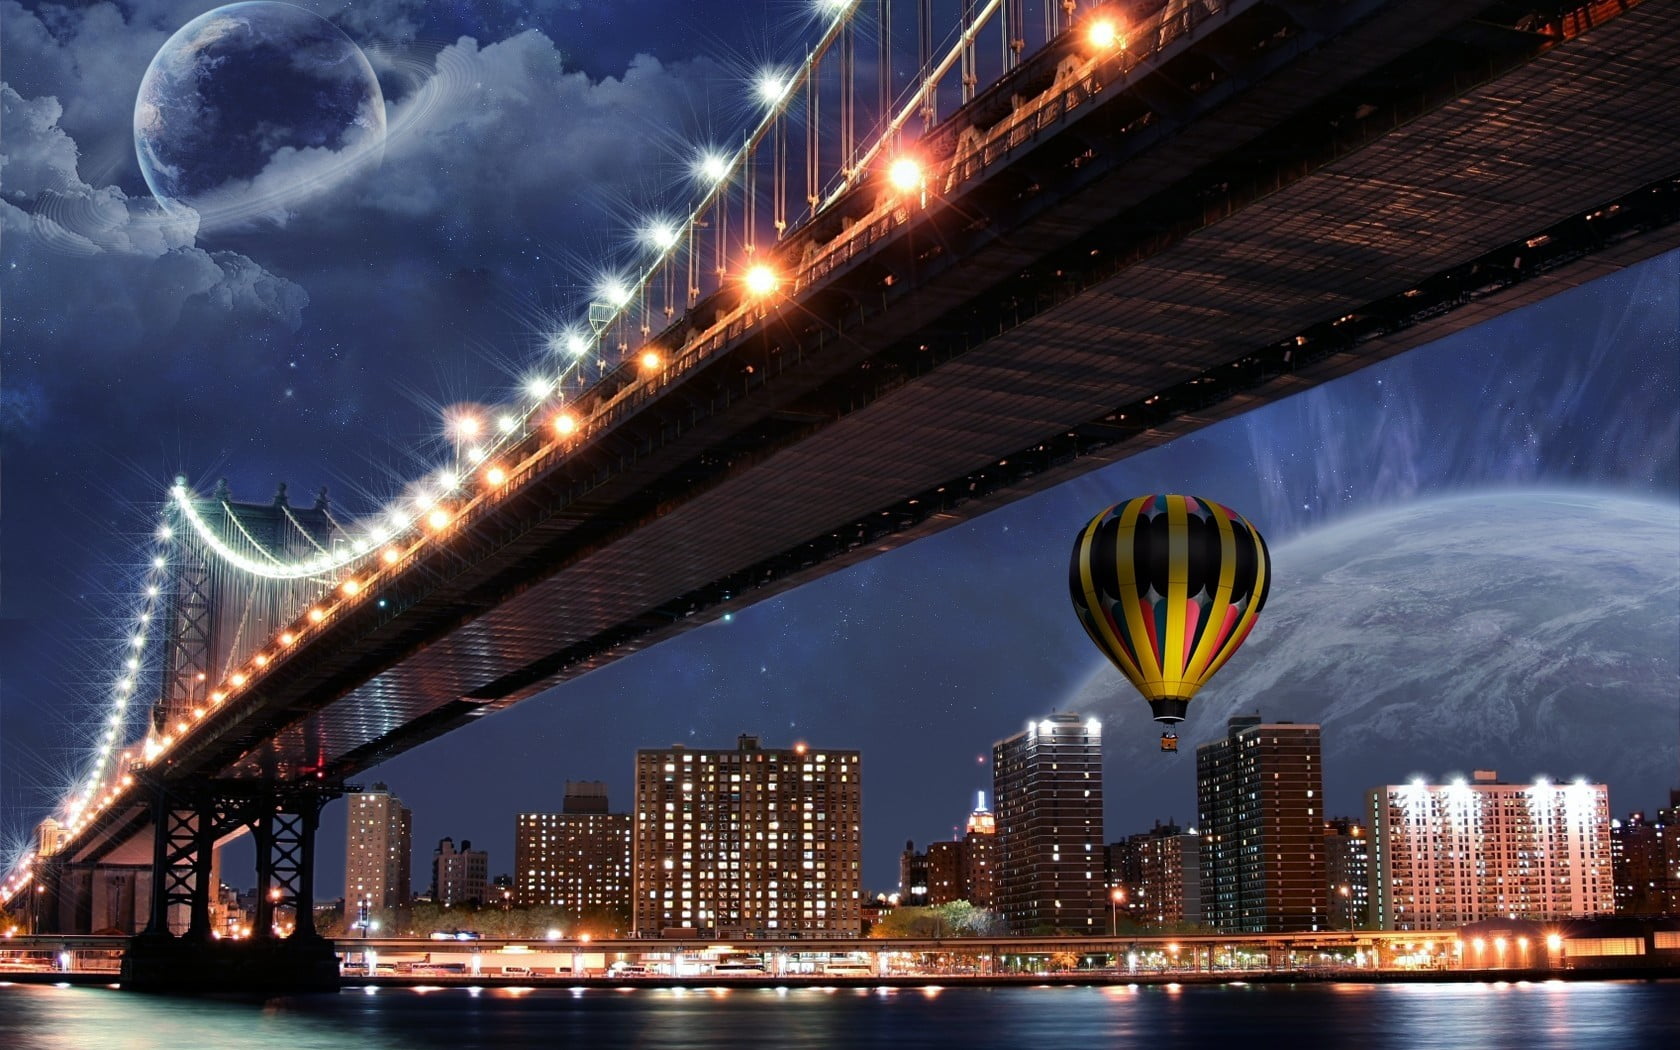 yellow and red hot air balloon, planet, bridge, hot air balloons, cityscape